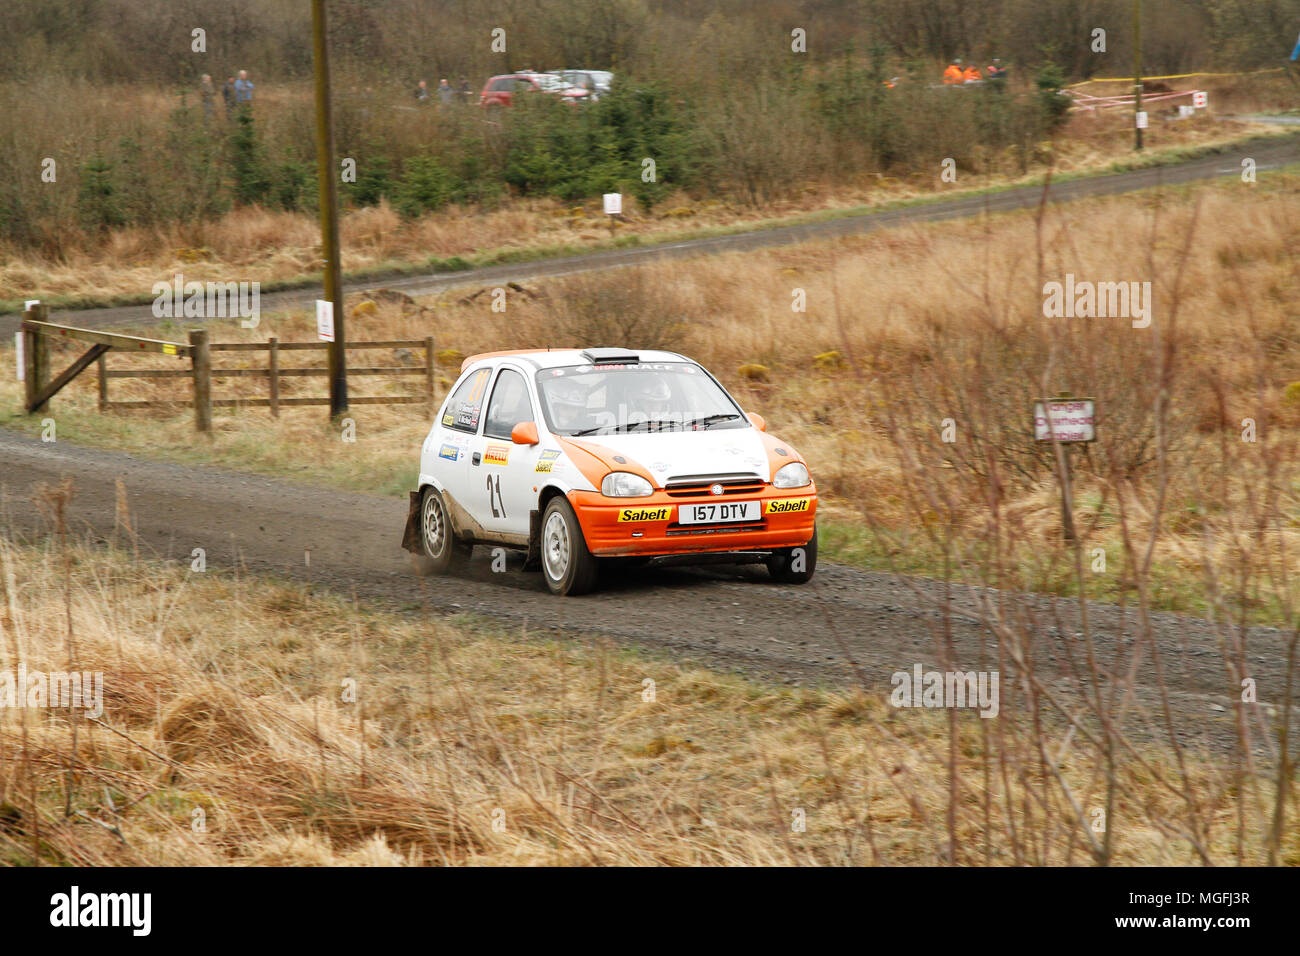 Kielder Forest, Northumberland, UK, 28 April 2018. Rally drivers compete in the Pirelli International Rally and the FUCHS Lubricant MSA British Historic Rally Championship. (Special Stage 1 - Pundershaw 1). Andrew Cheal/Alamy Live News Stock Photo